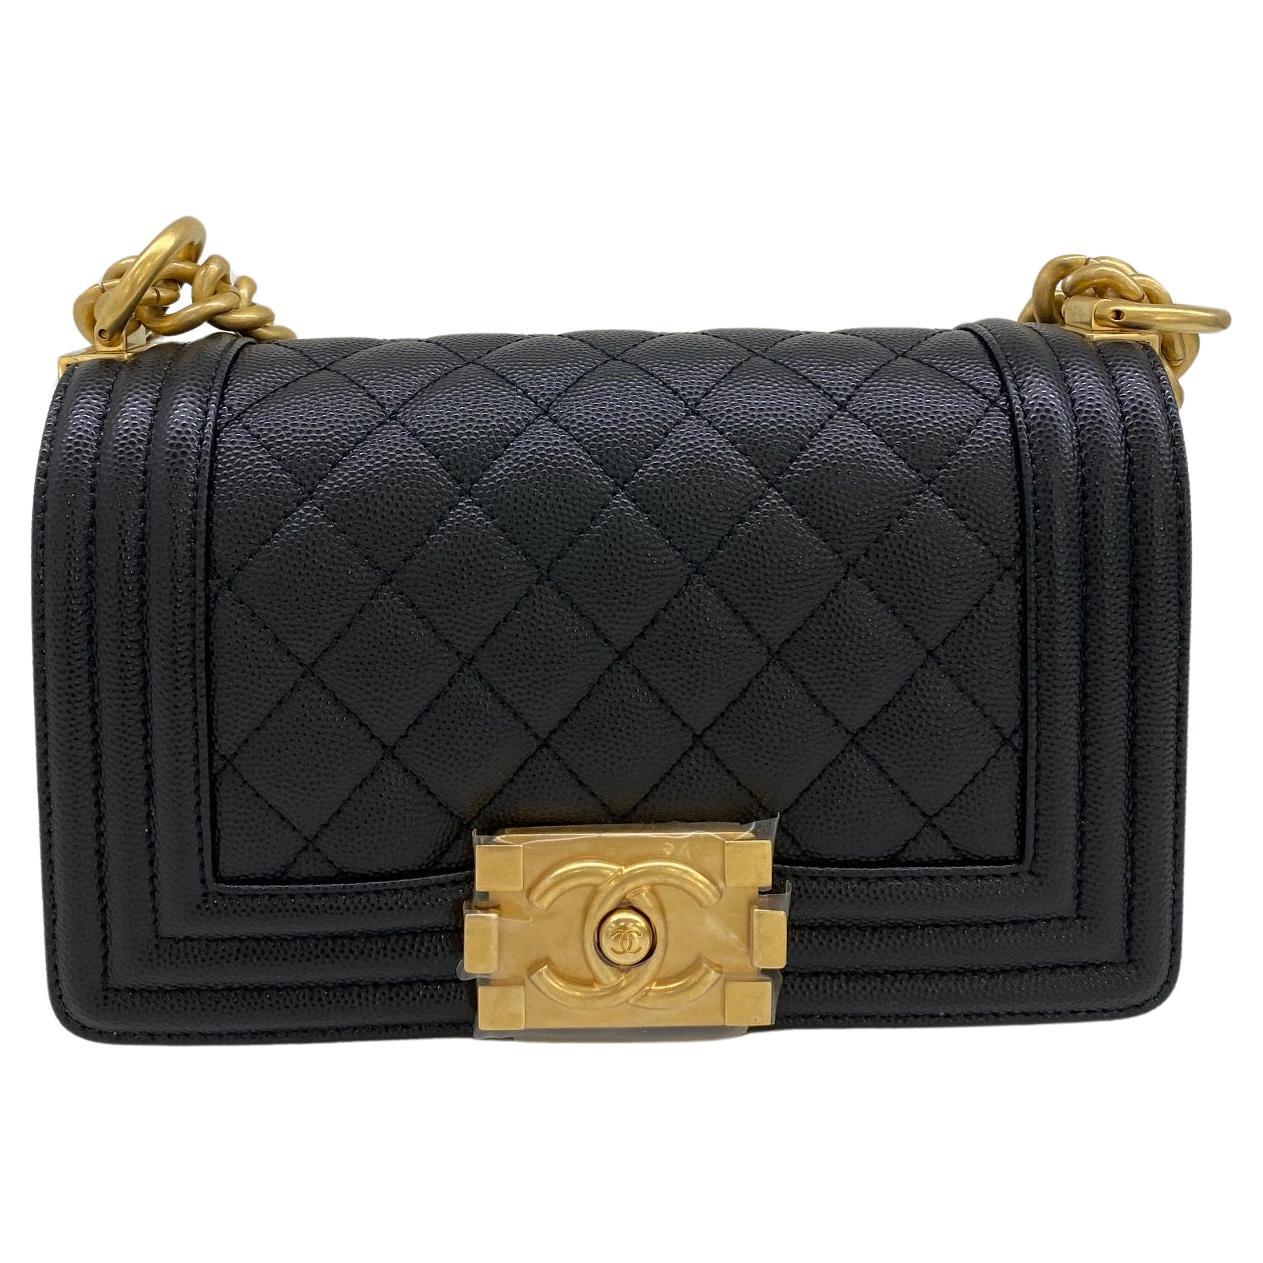 How much is a small Chanel Boy bag?